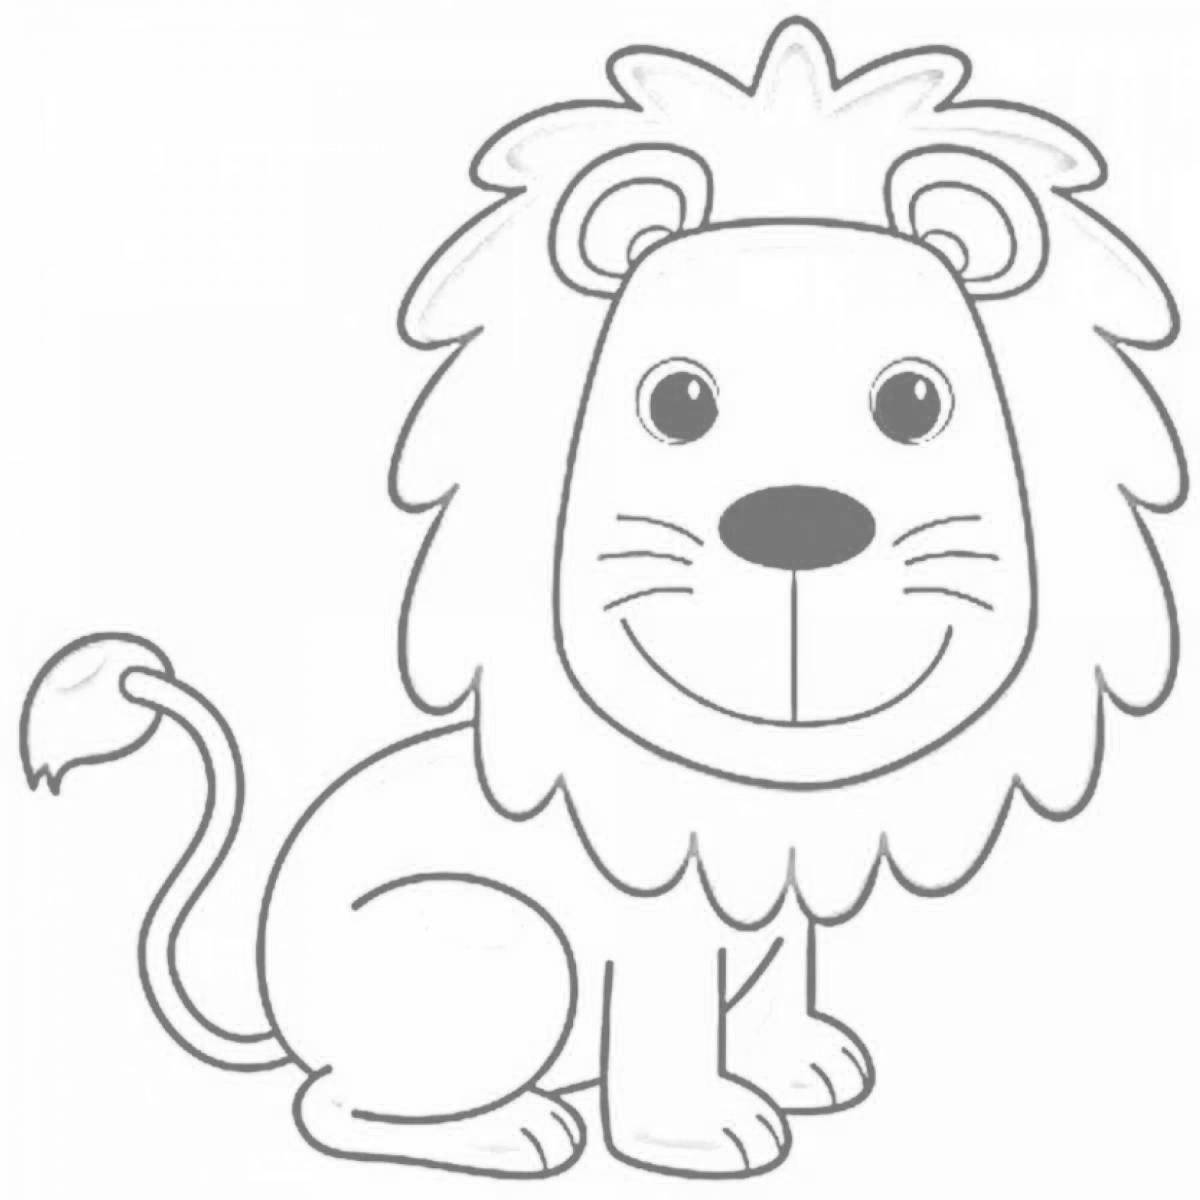 Fascinating lion coloring page